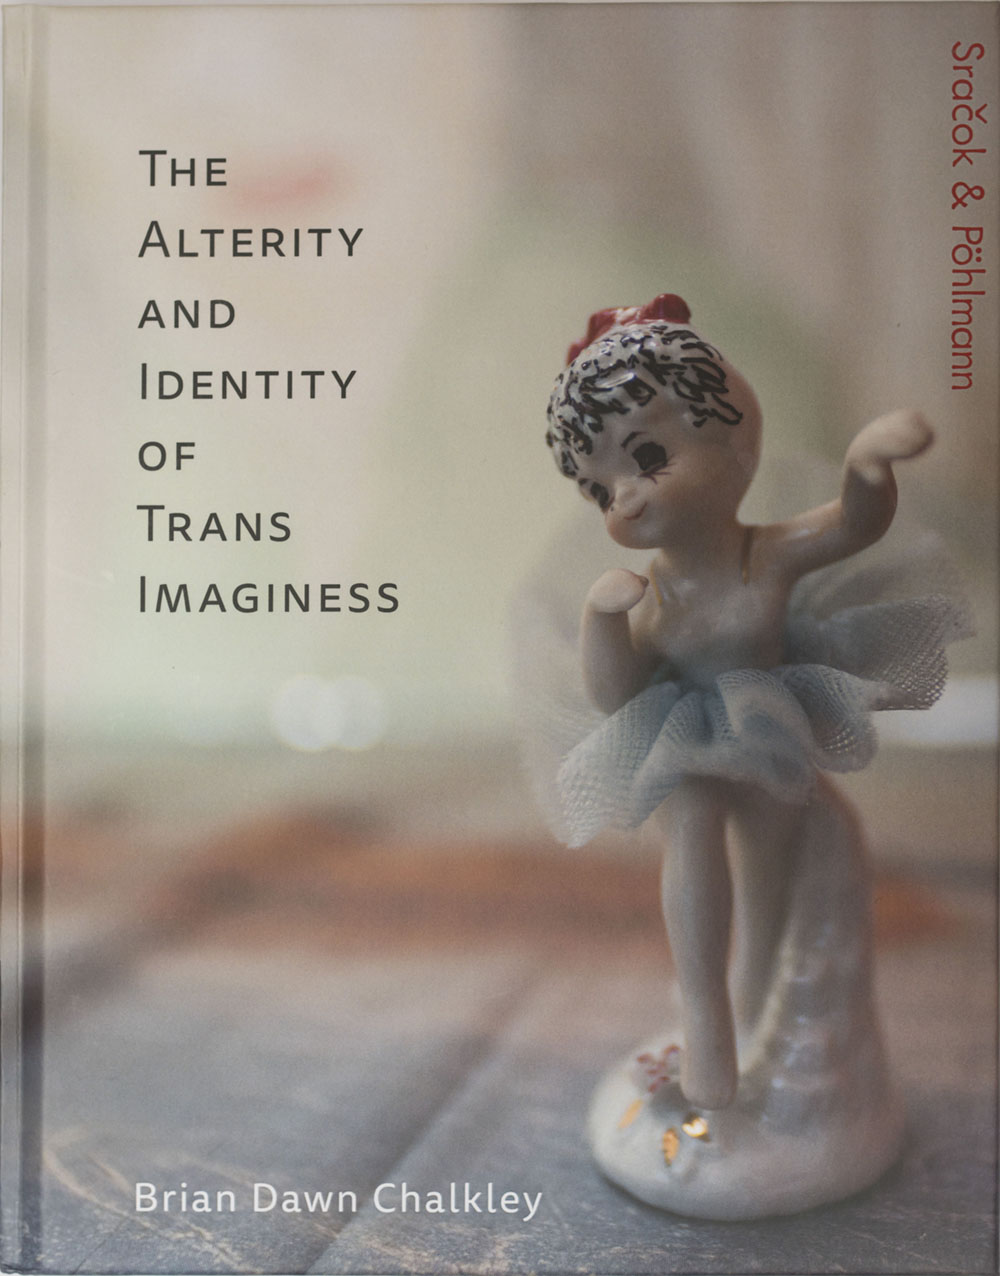 The Alterity and Identity of Trans Imaginess